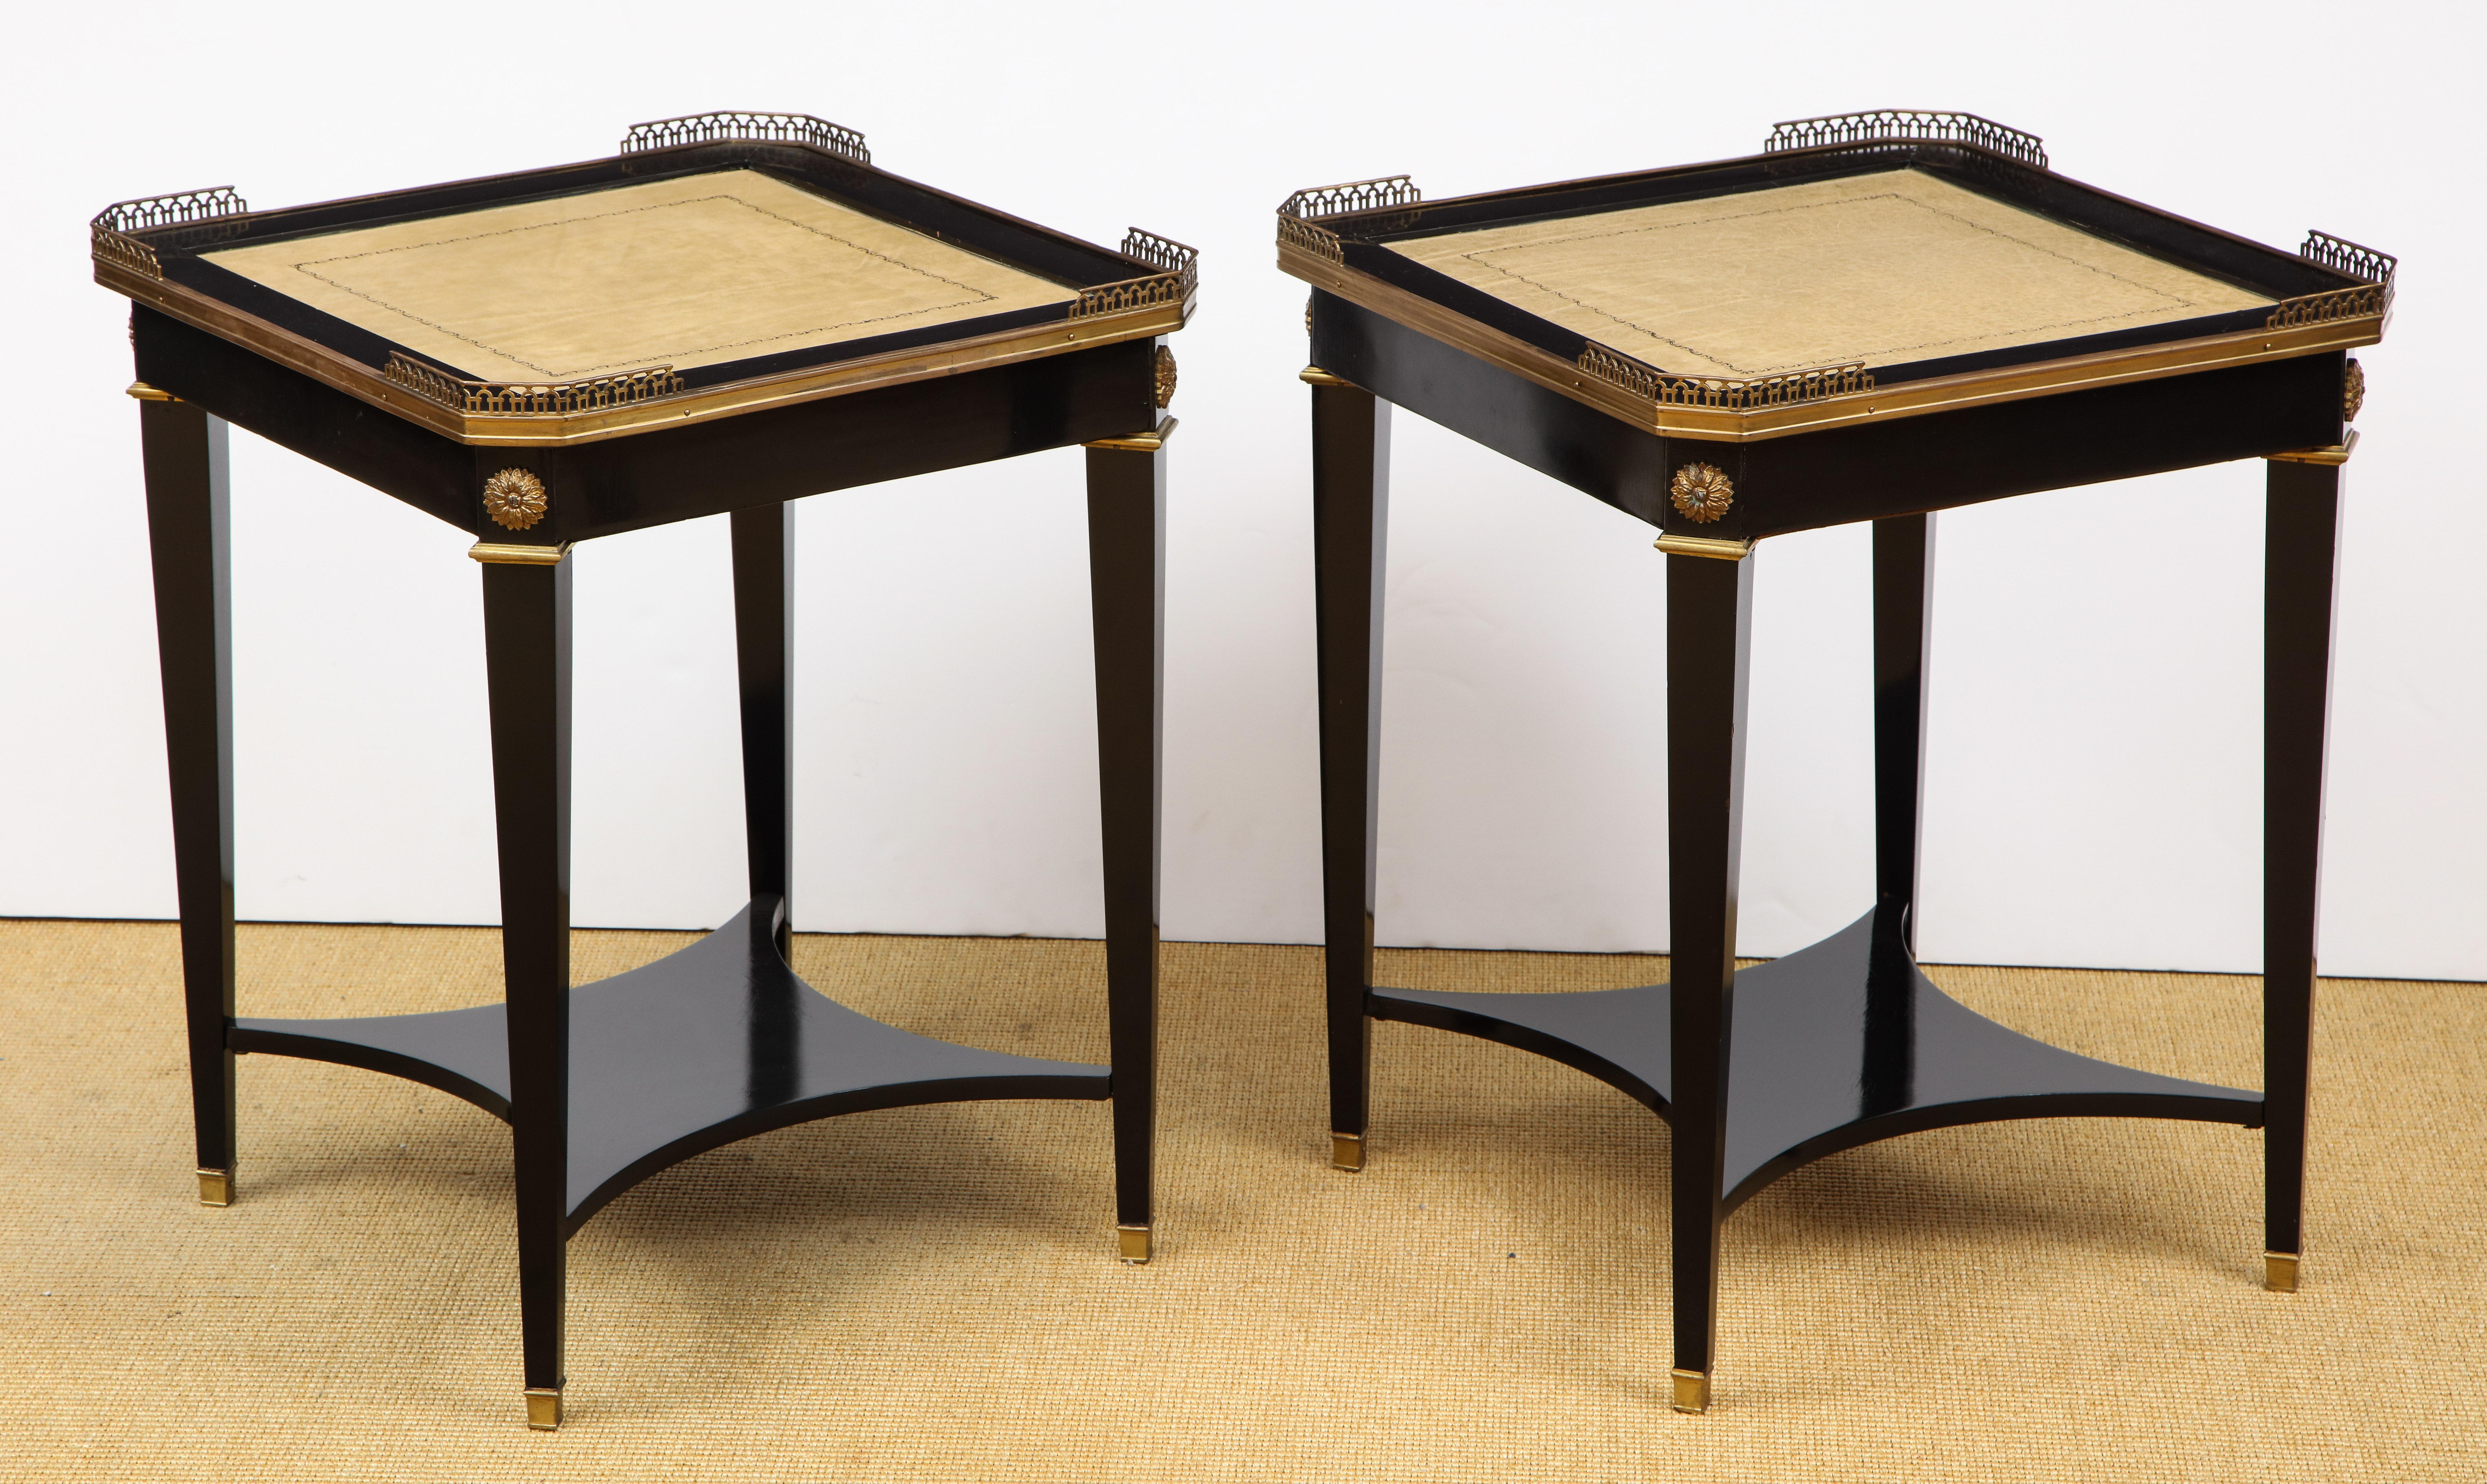 The Louis XVI style tables, each with a hammered leather top and brass gallery supported by four brass mounted tapering legs having a central shelf, stamped JANSEN.